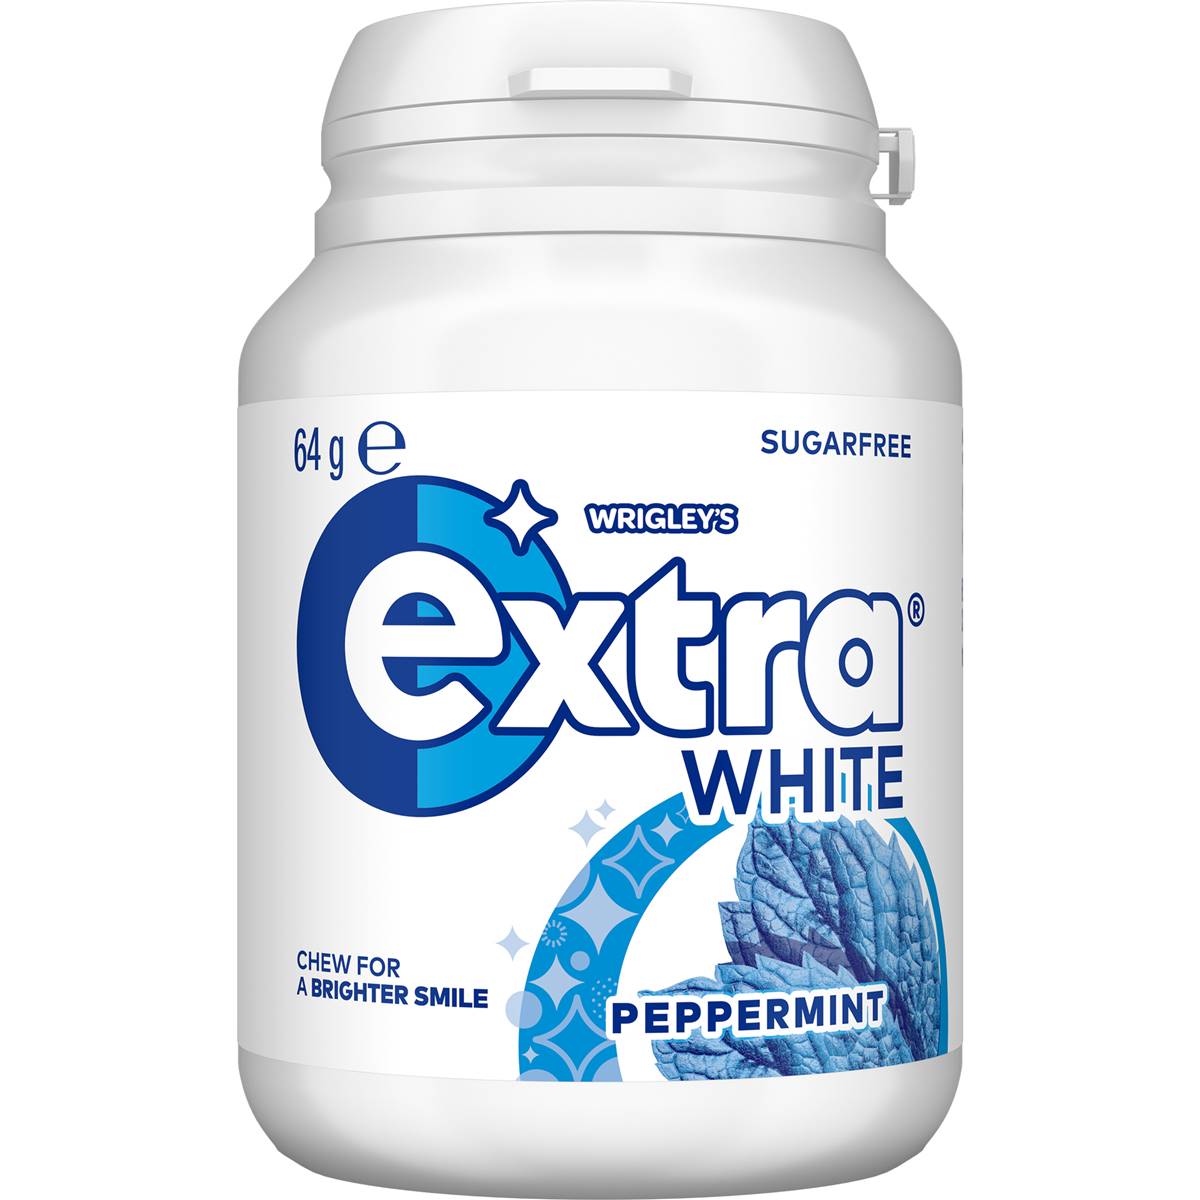 Calories in Extra White Peppermint Sugar Free Chewing Gum Bottle